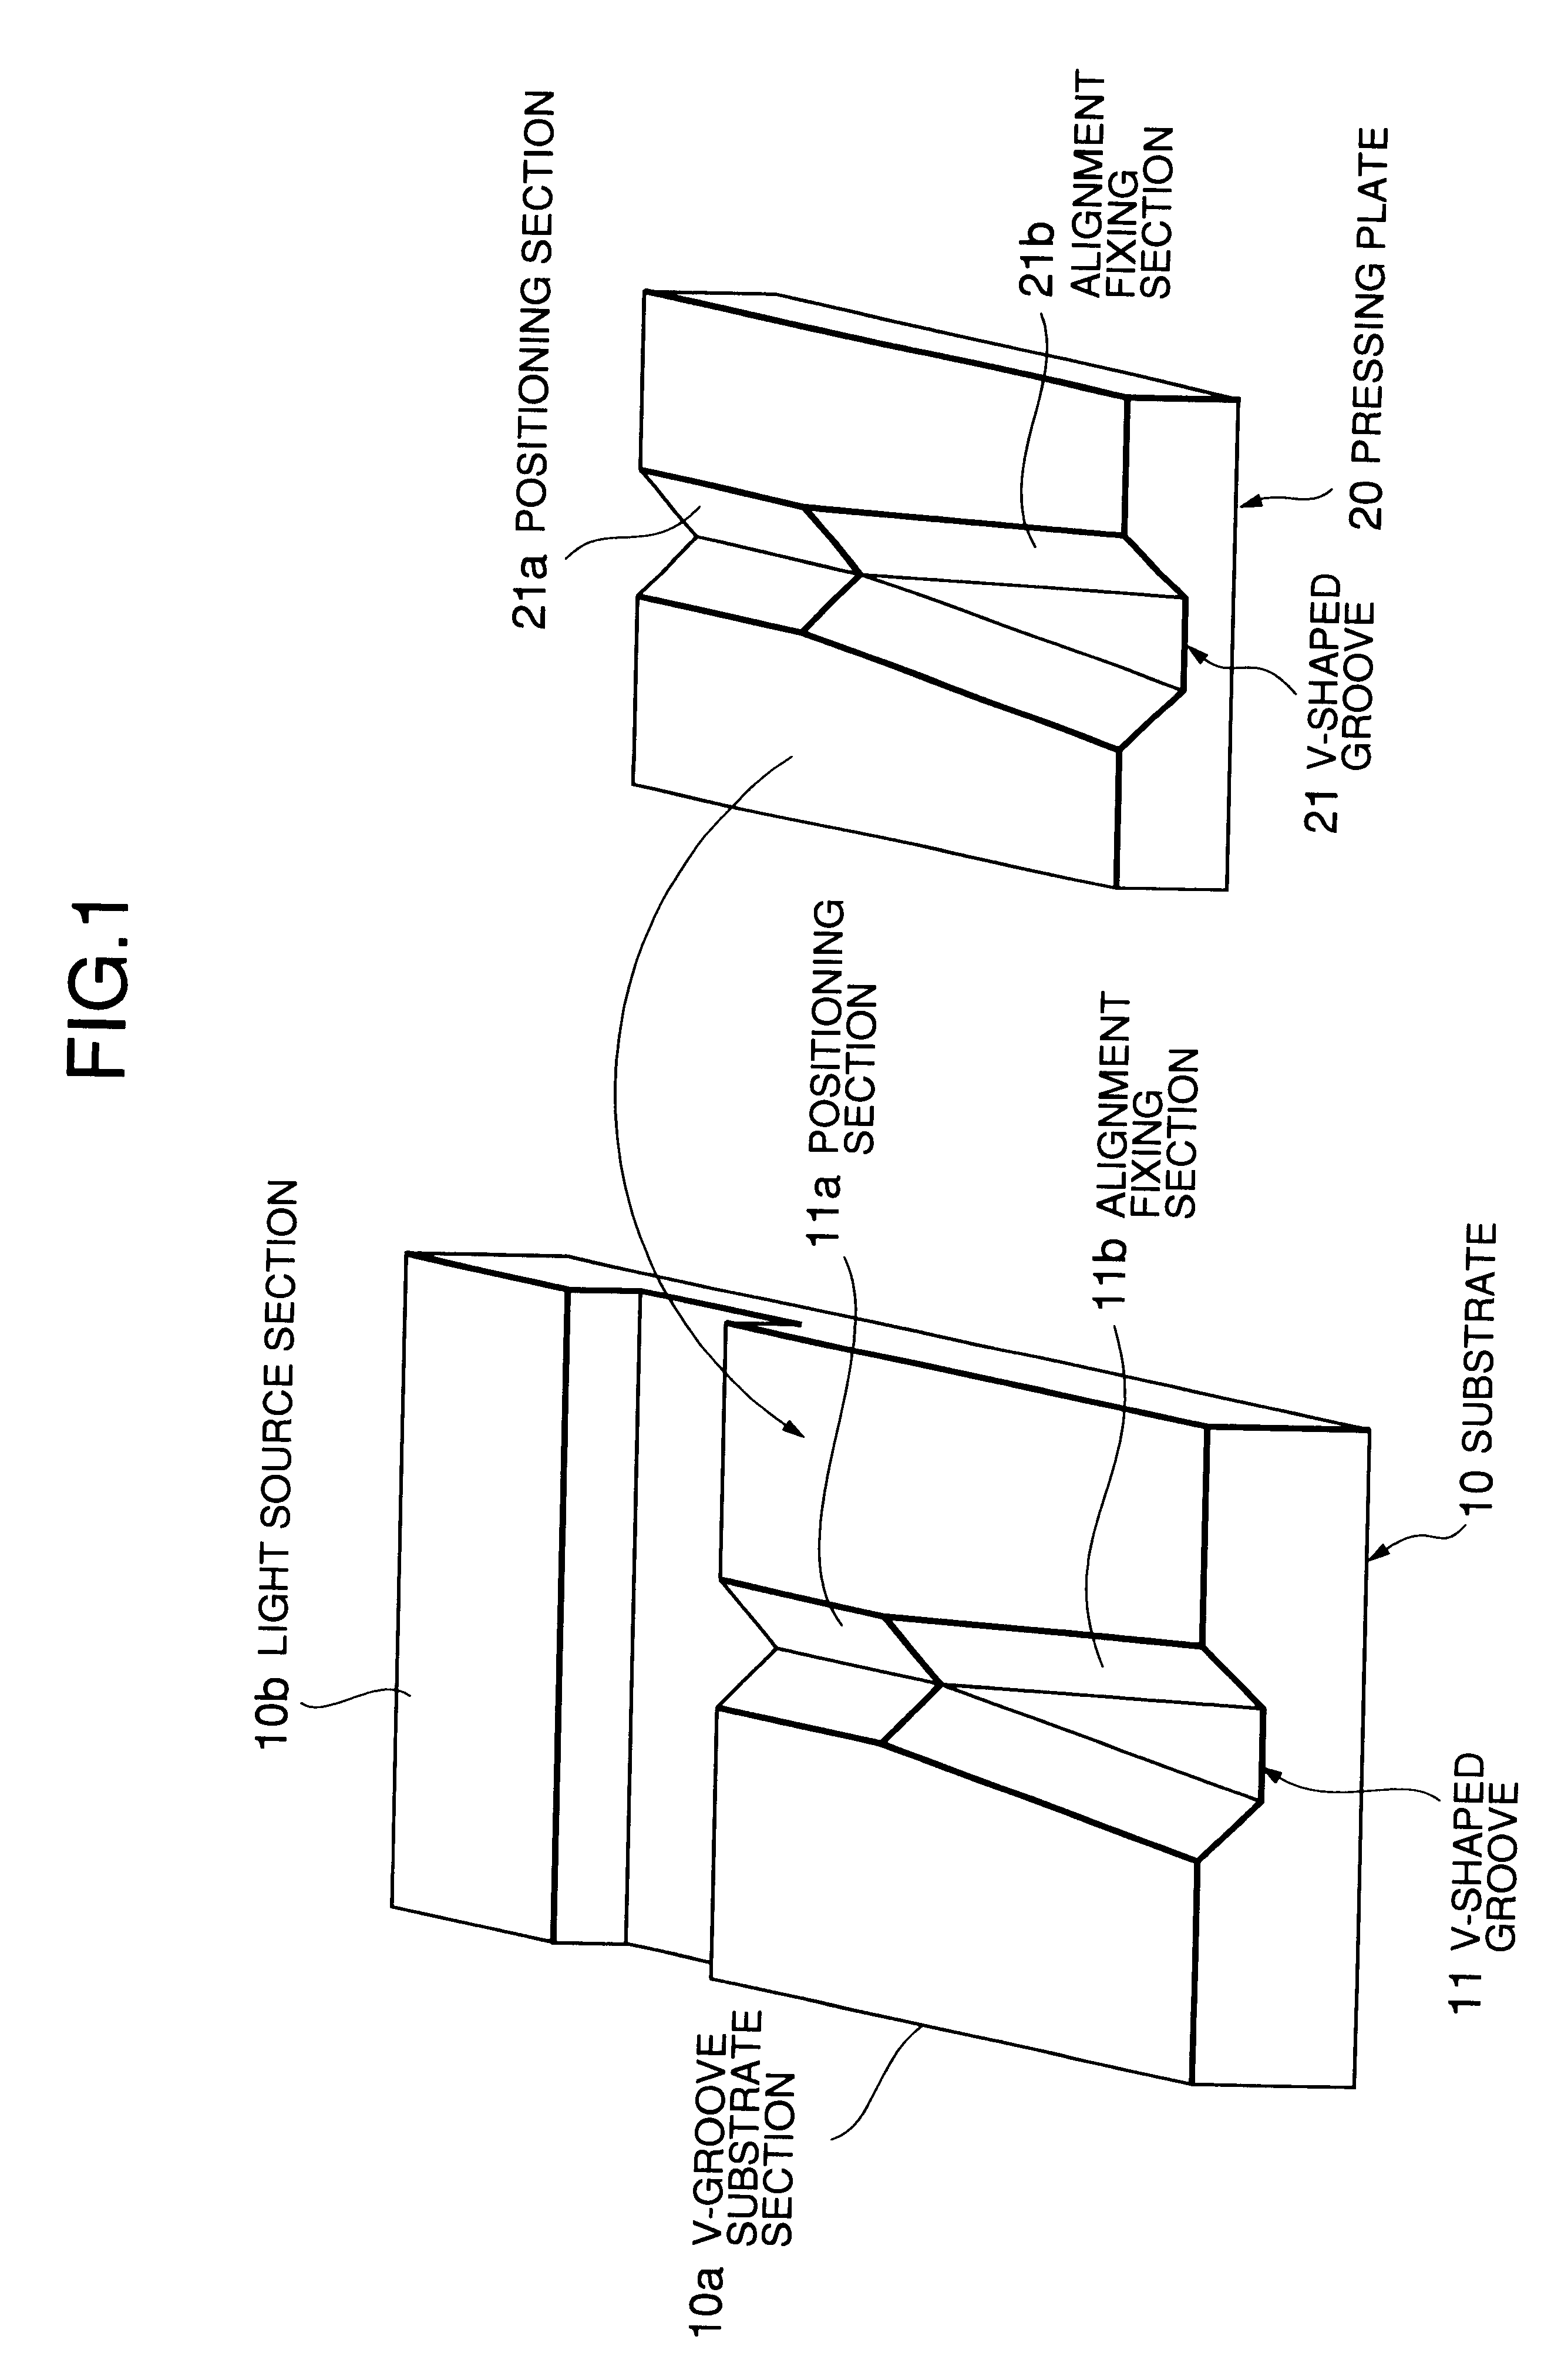 Installation structure for optical fiber